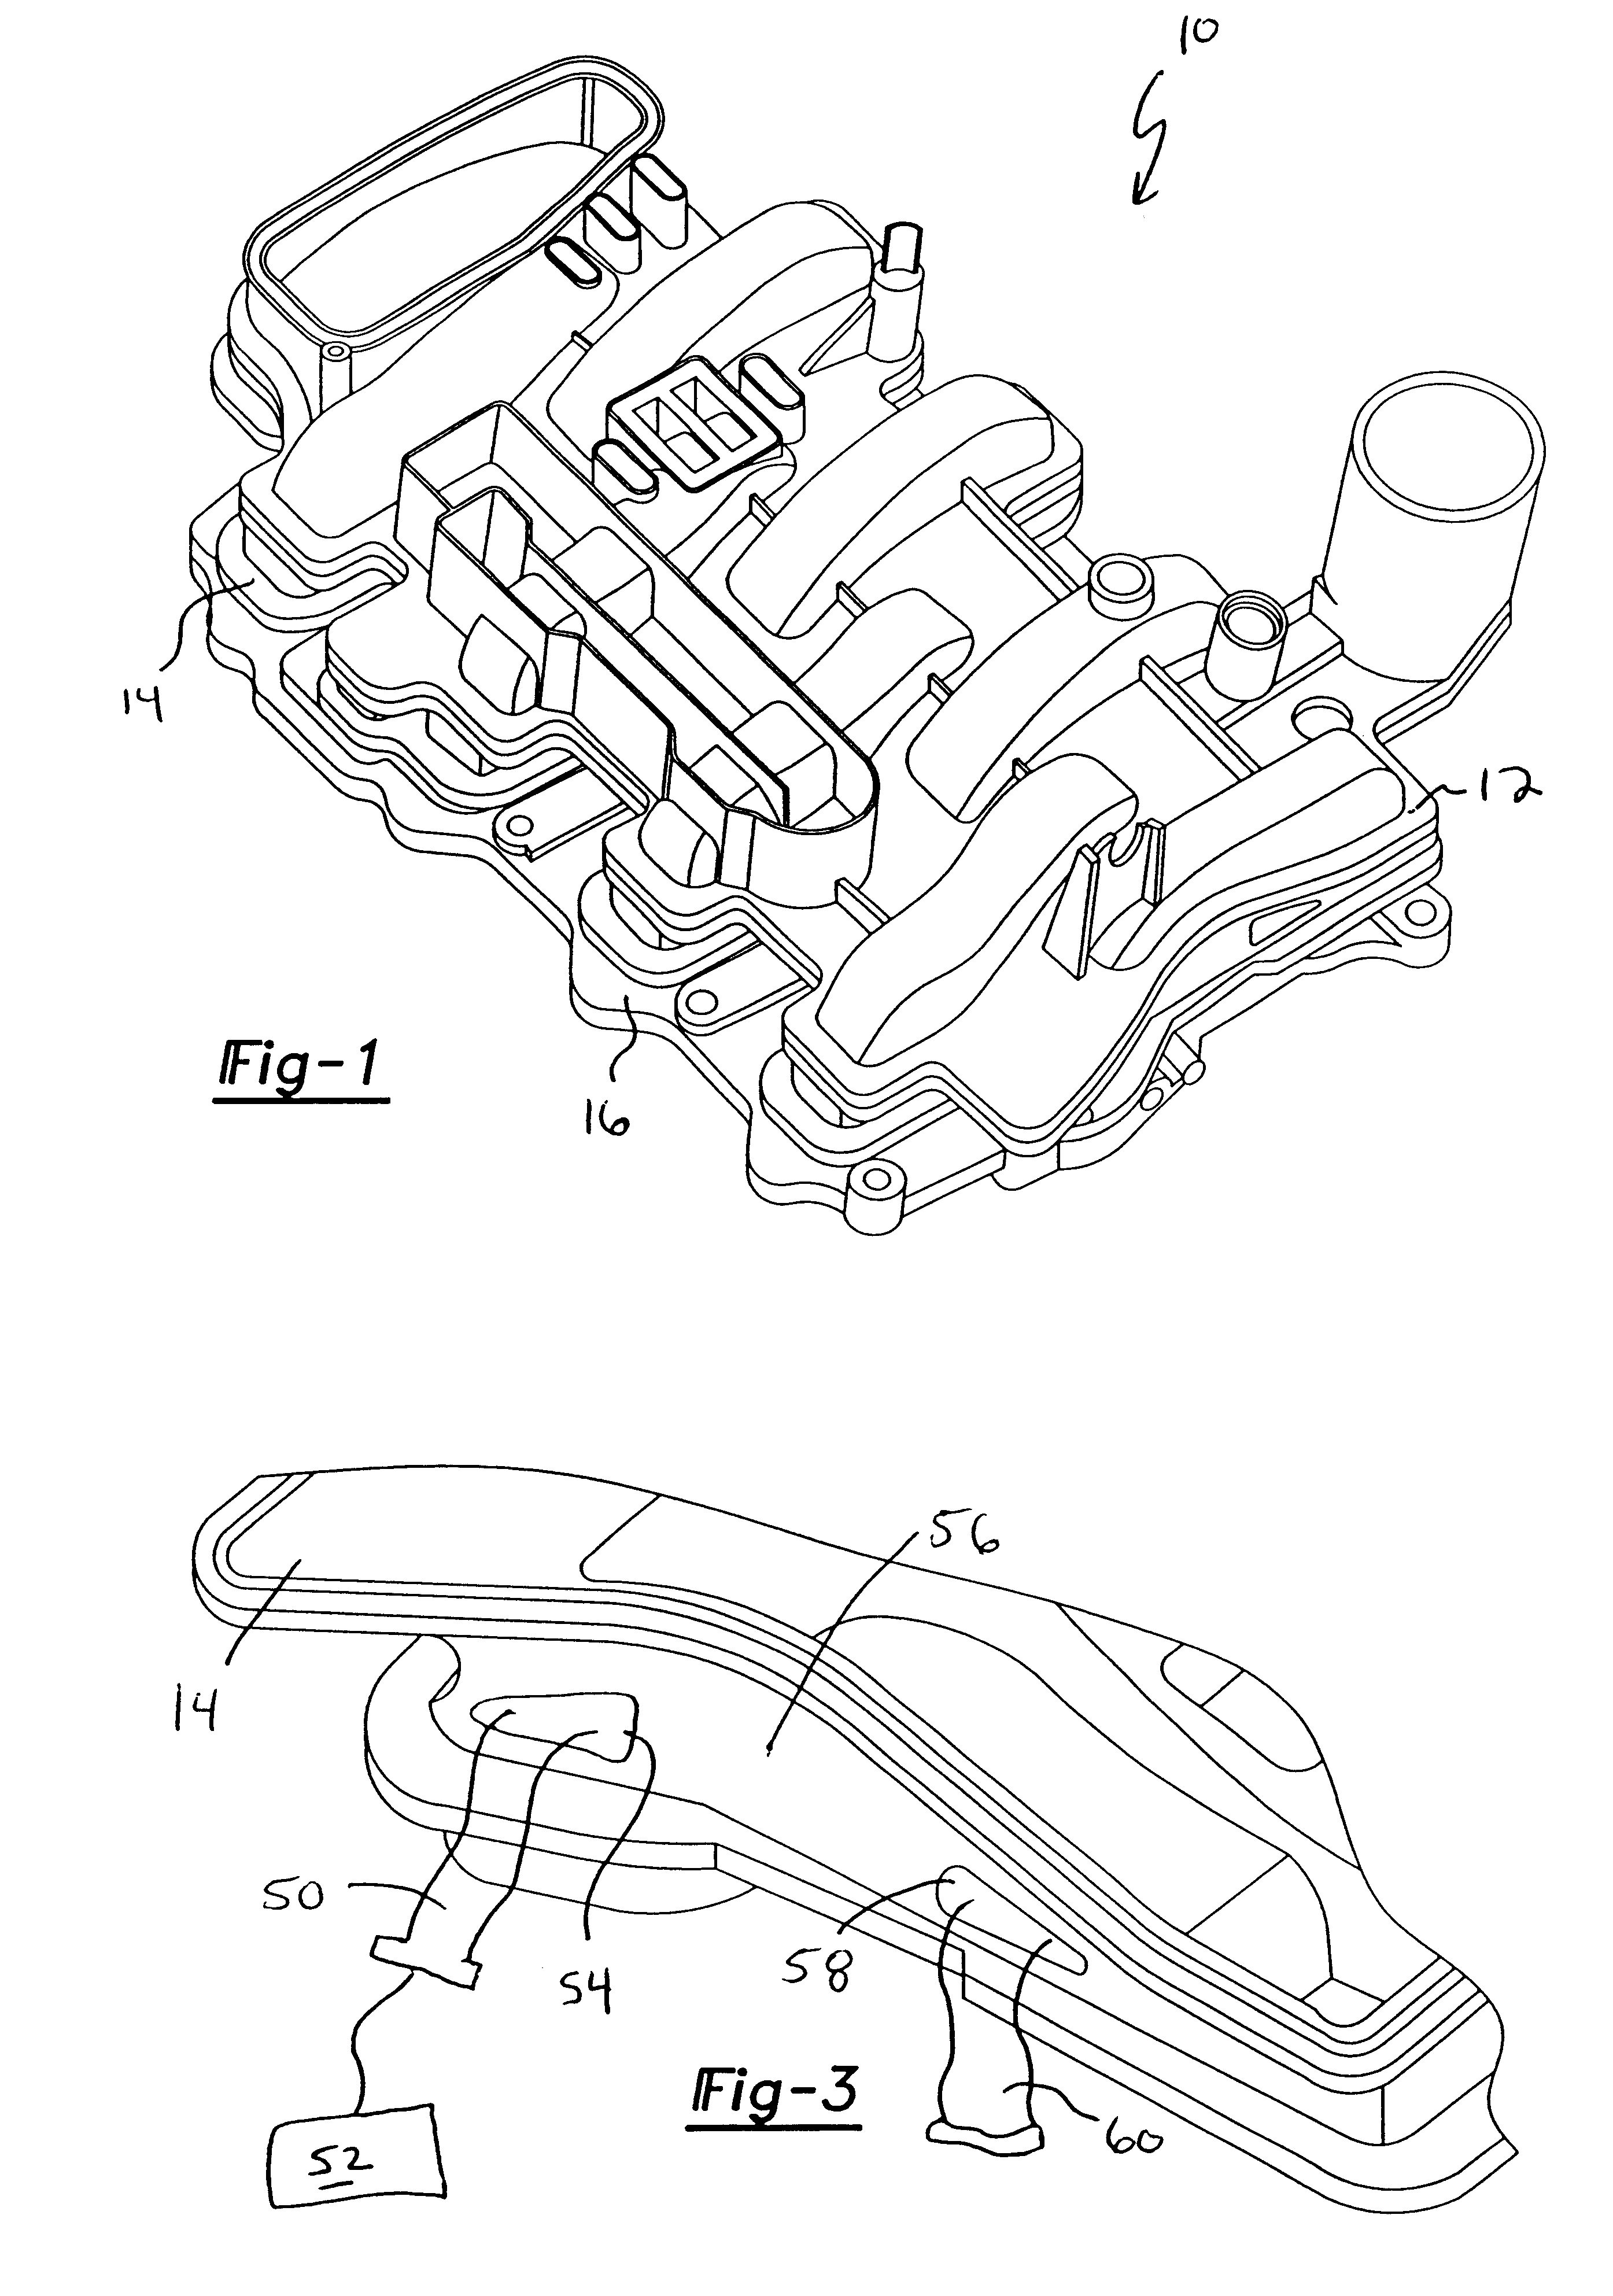 Intake manifold with internal fuel rail and injectors